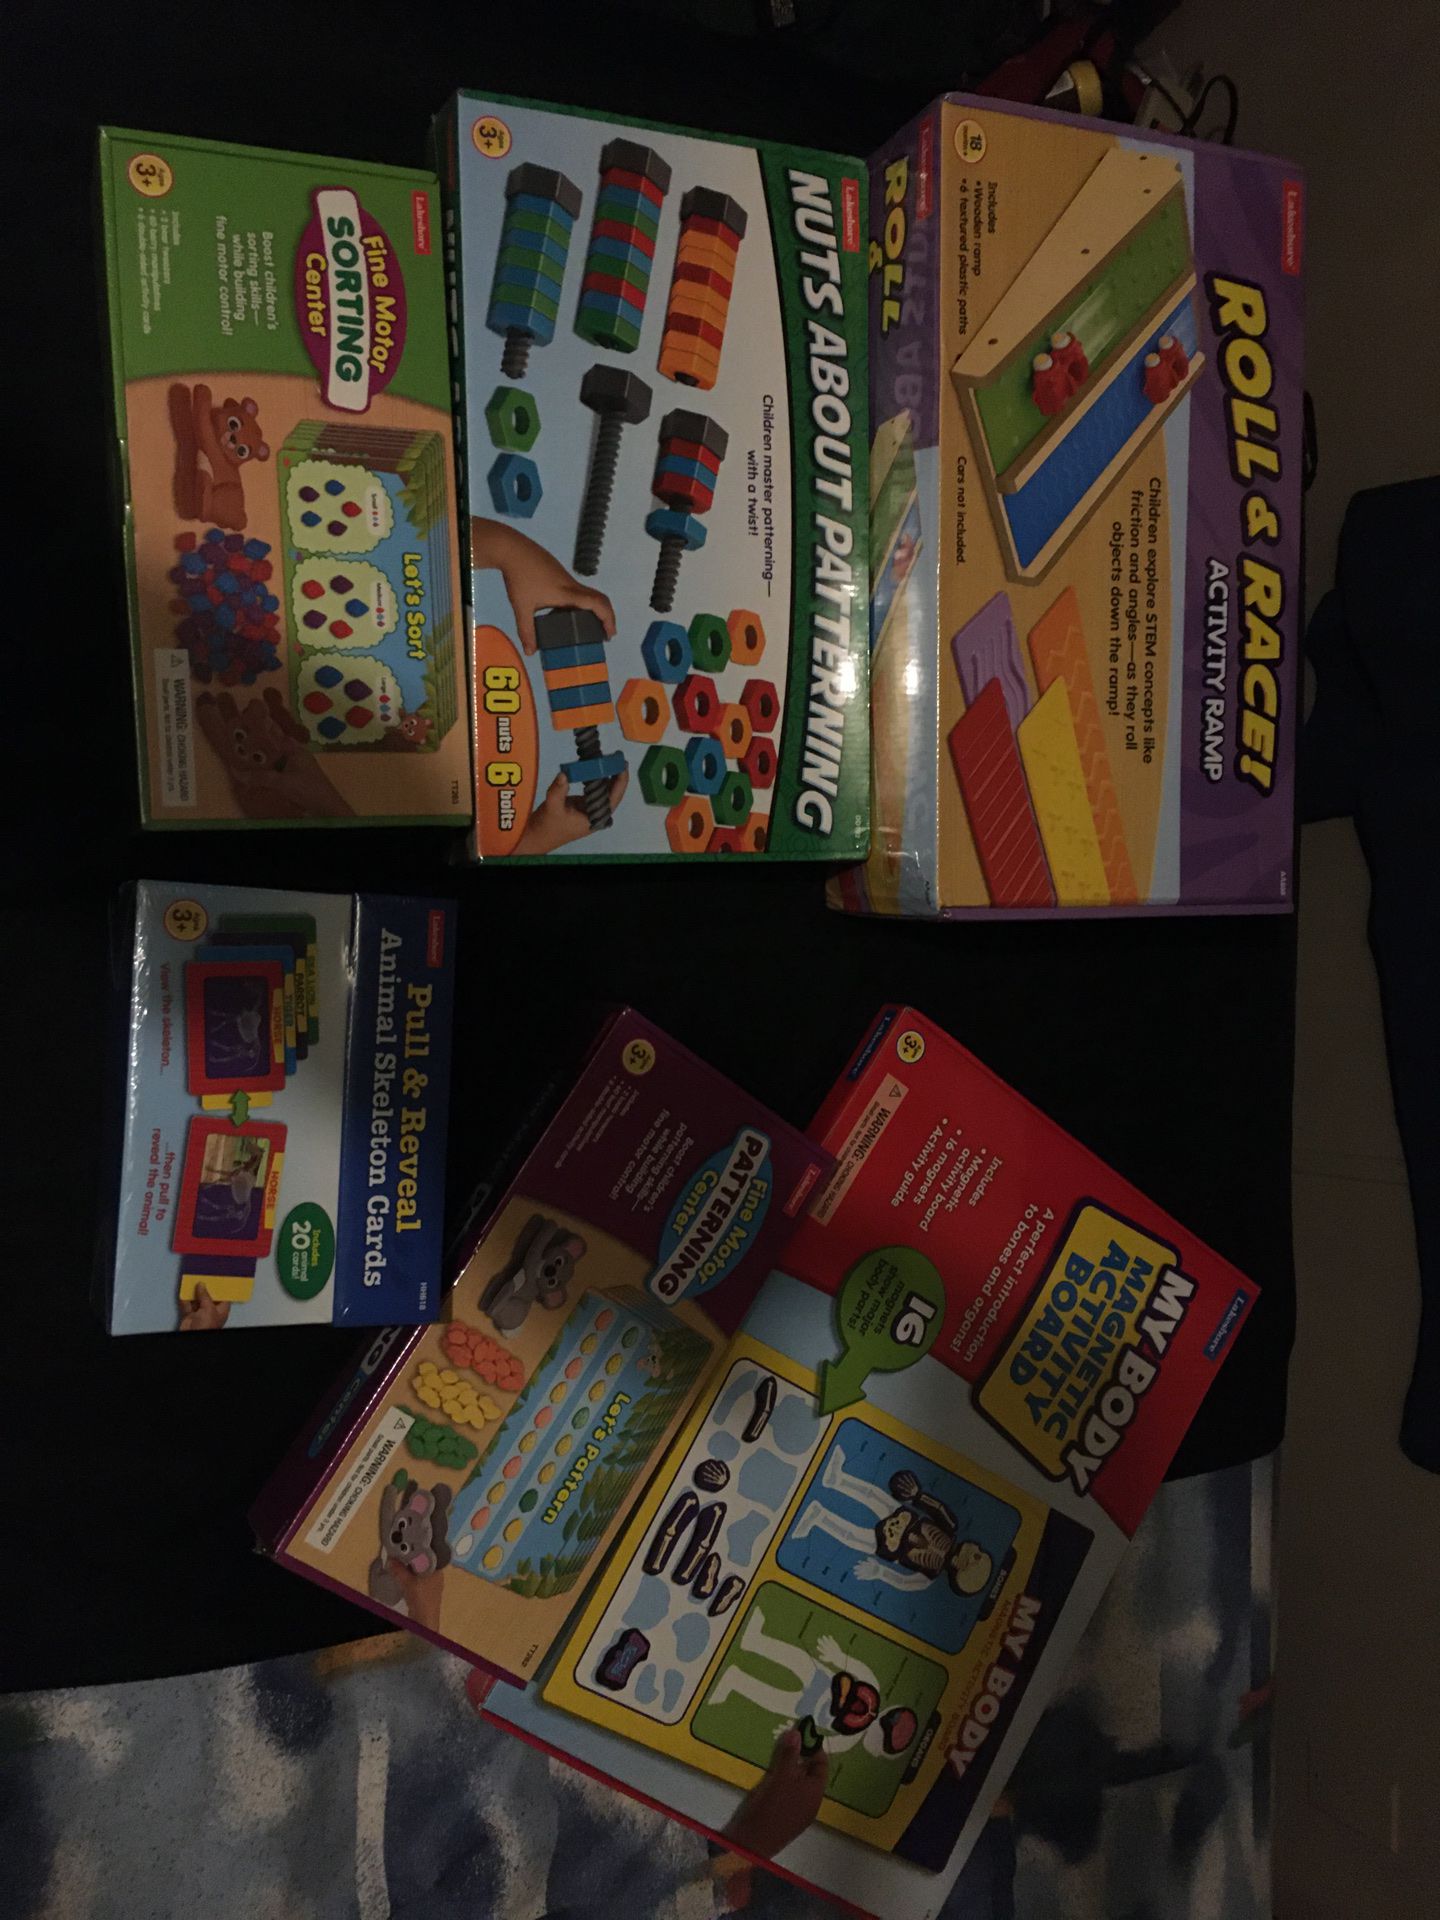 NEW KIds LEARNINg GAMeS paid 200.00